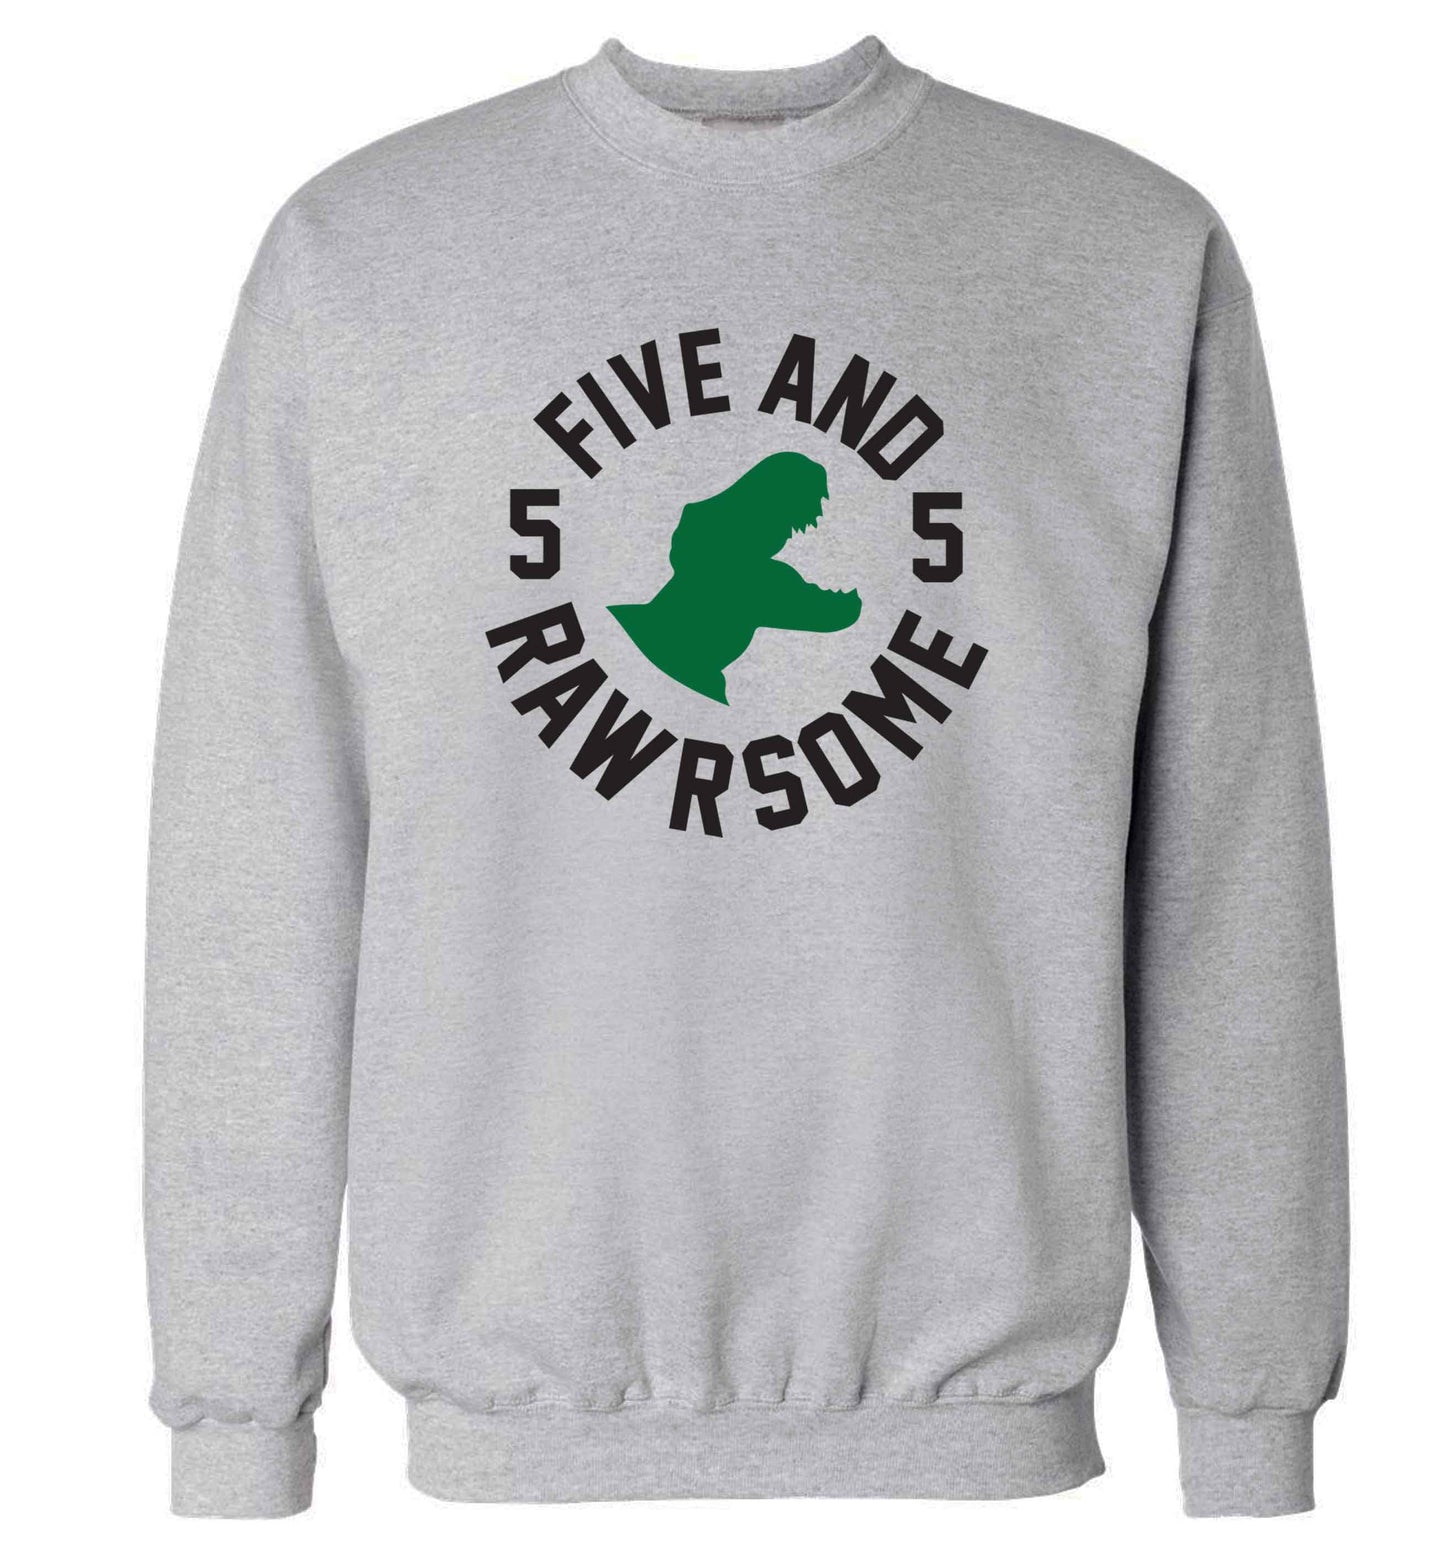 Five and rawrsome adult's unisex grey sweater 2XL